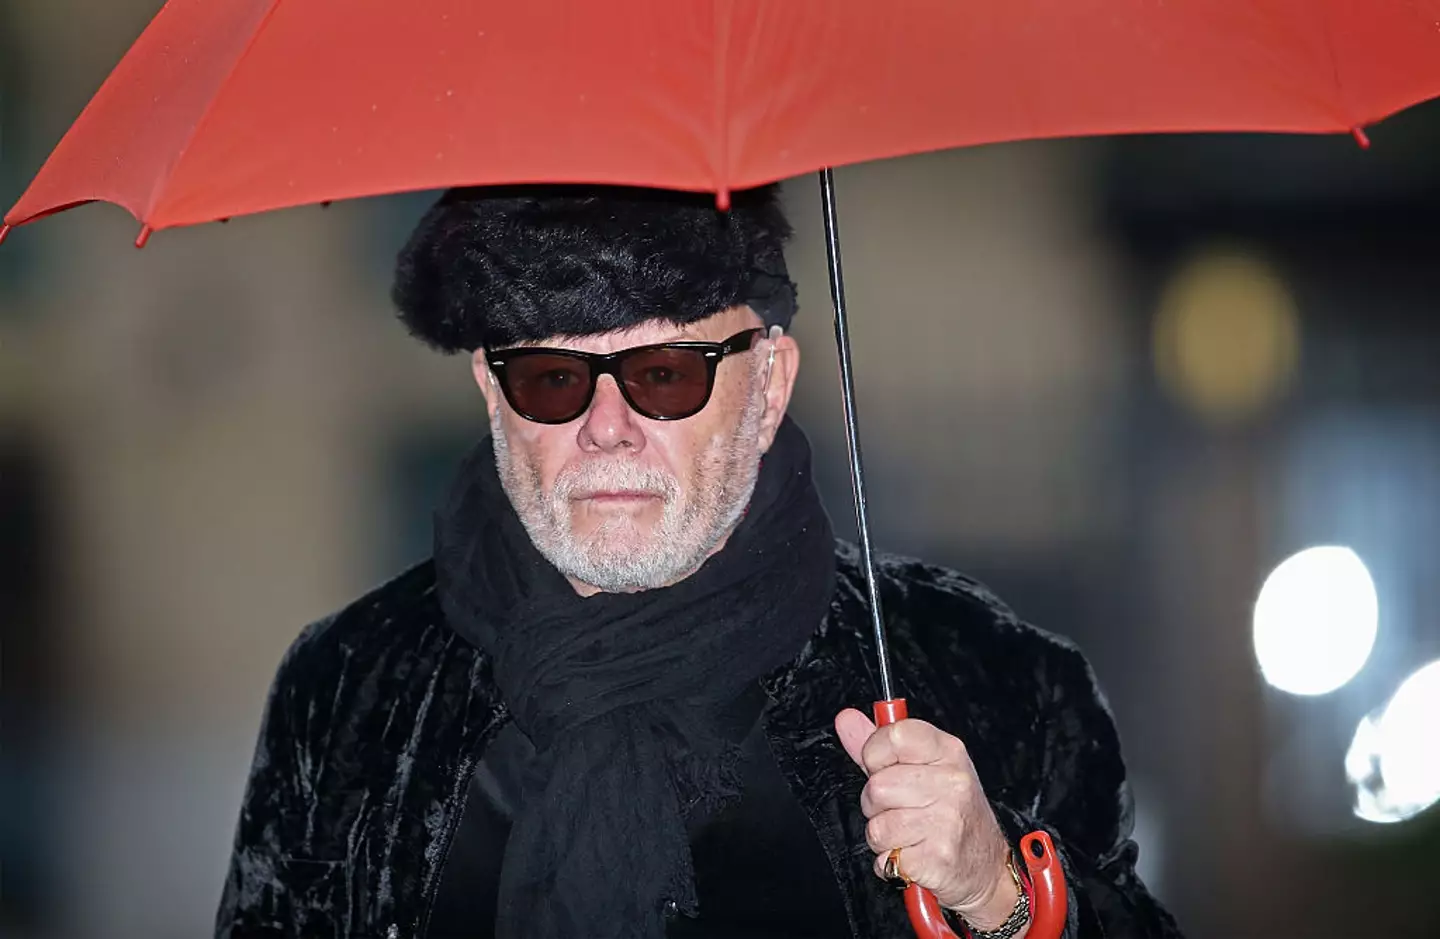 Gary Glitter, real name Paul Gadd, was jailed in 2015.